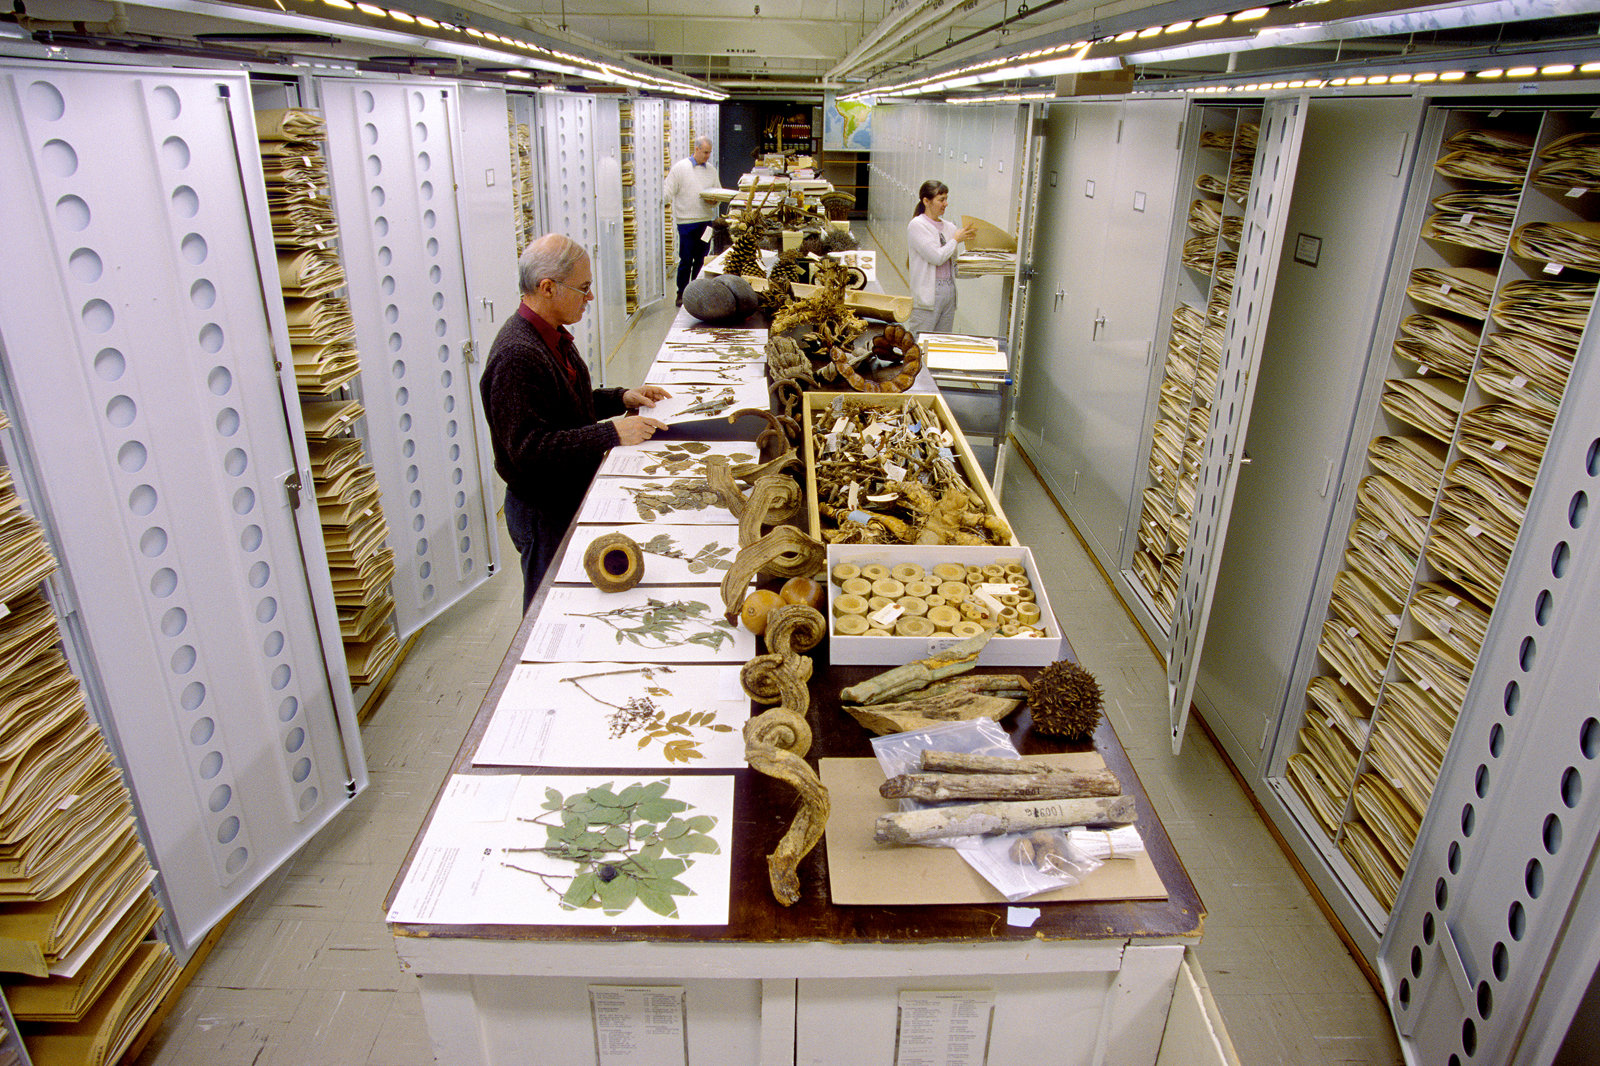 Smithsonian botany collections with workers examining specimens.